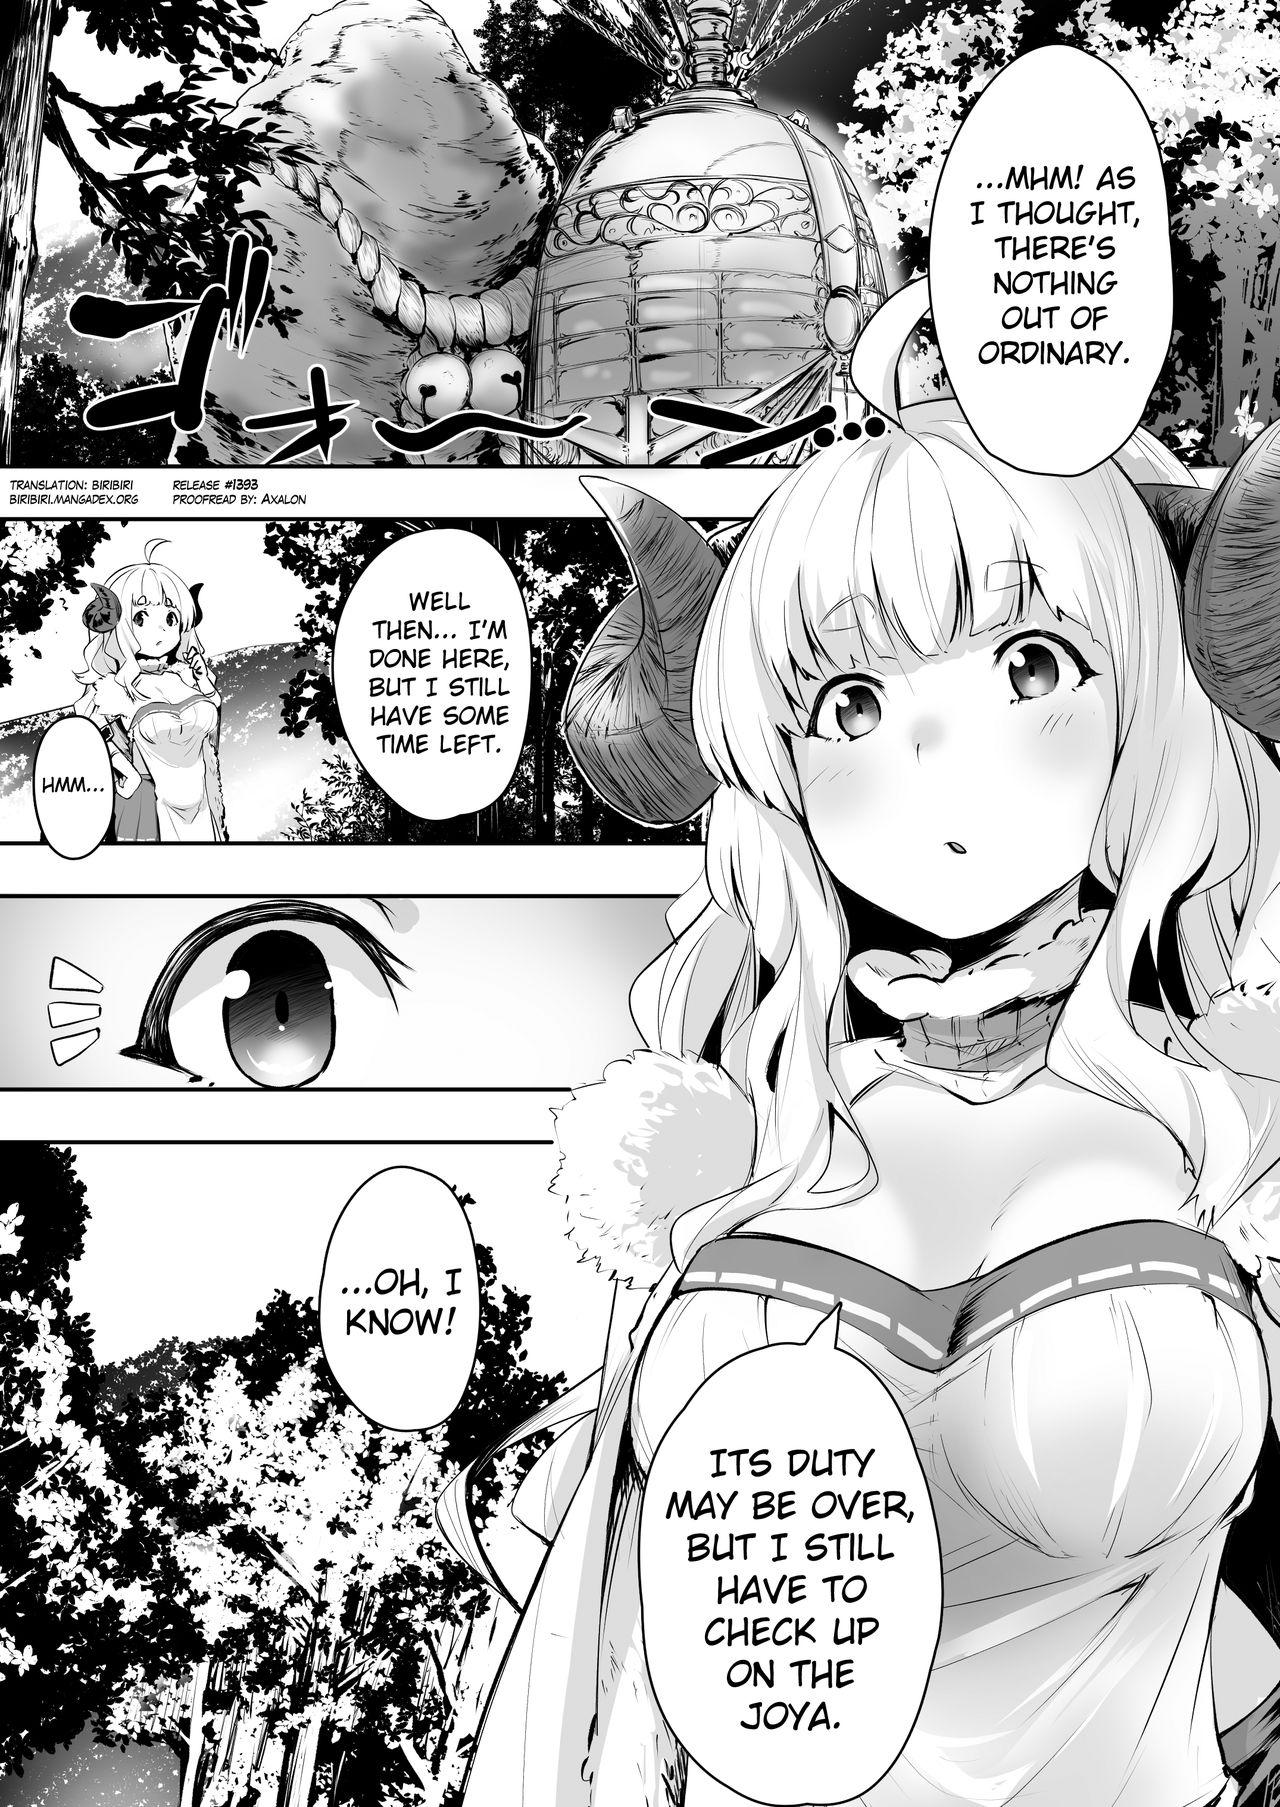 Collar Bonnou Aftercare | Aftercare of Carnal Desires - Granblue fantasy Wild - Page 2